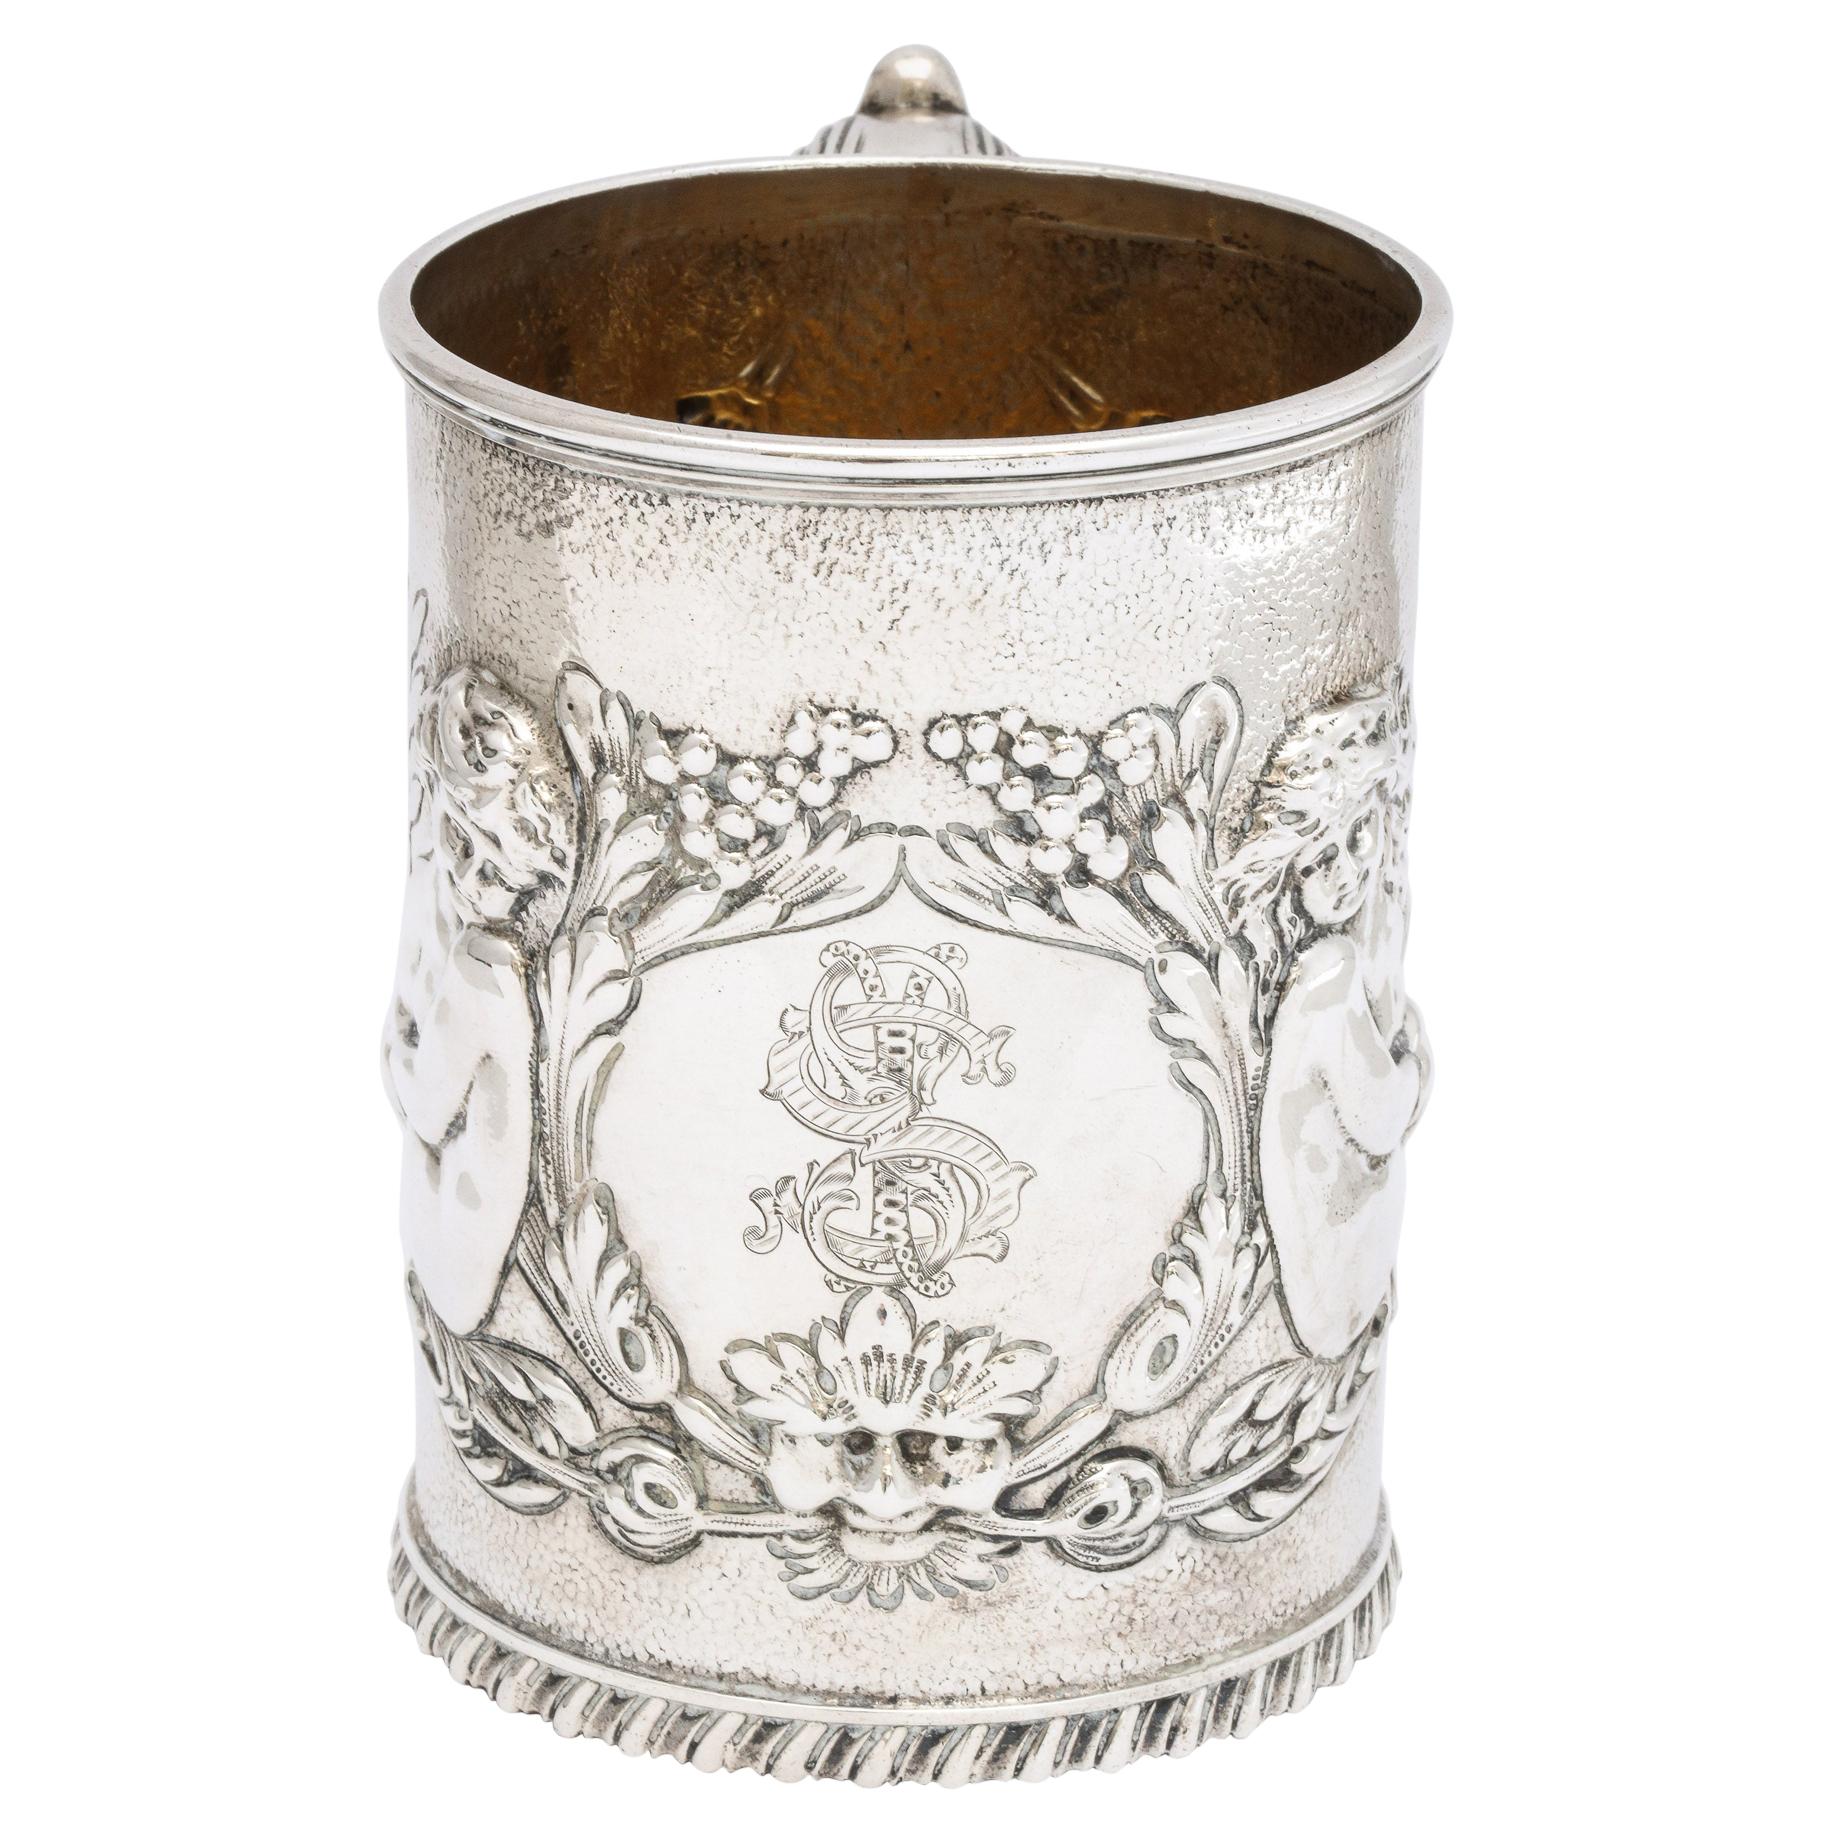 Neoclassical Sterling Silver Mug/Cup by The Whiting Mfg. Co.